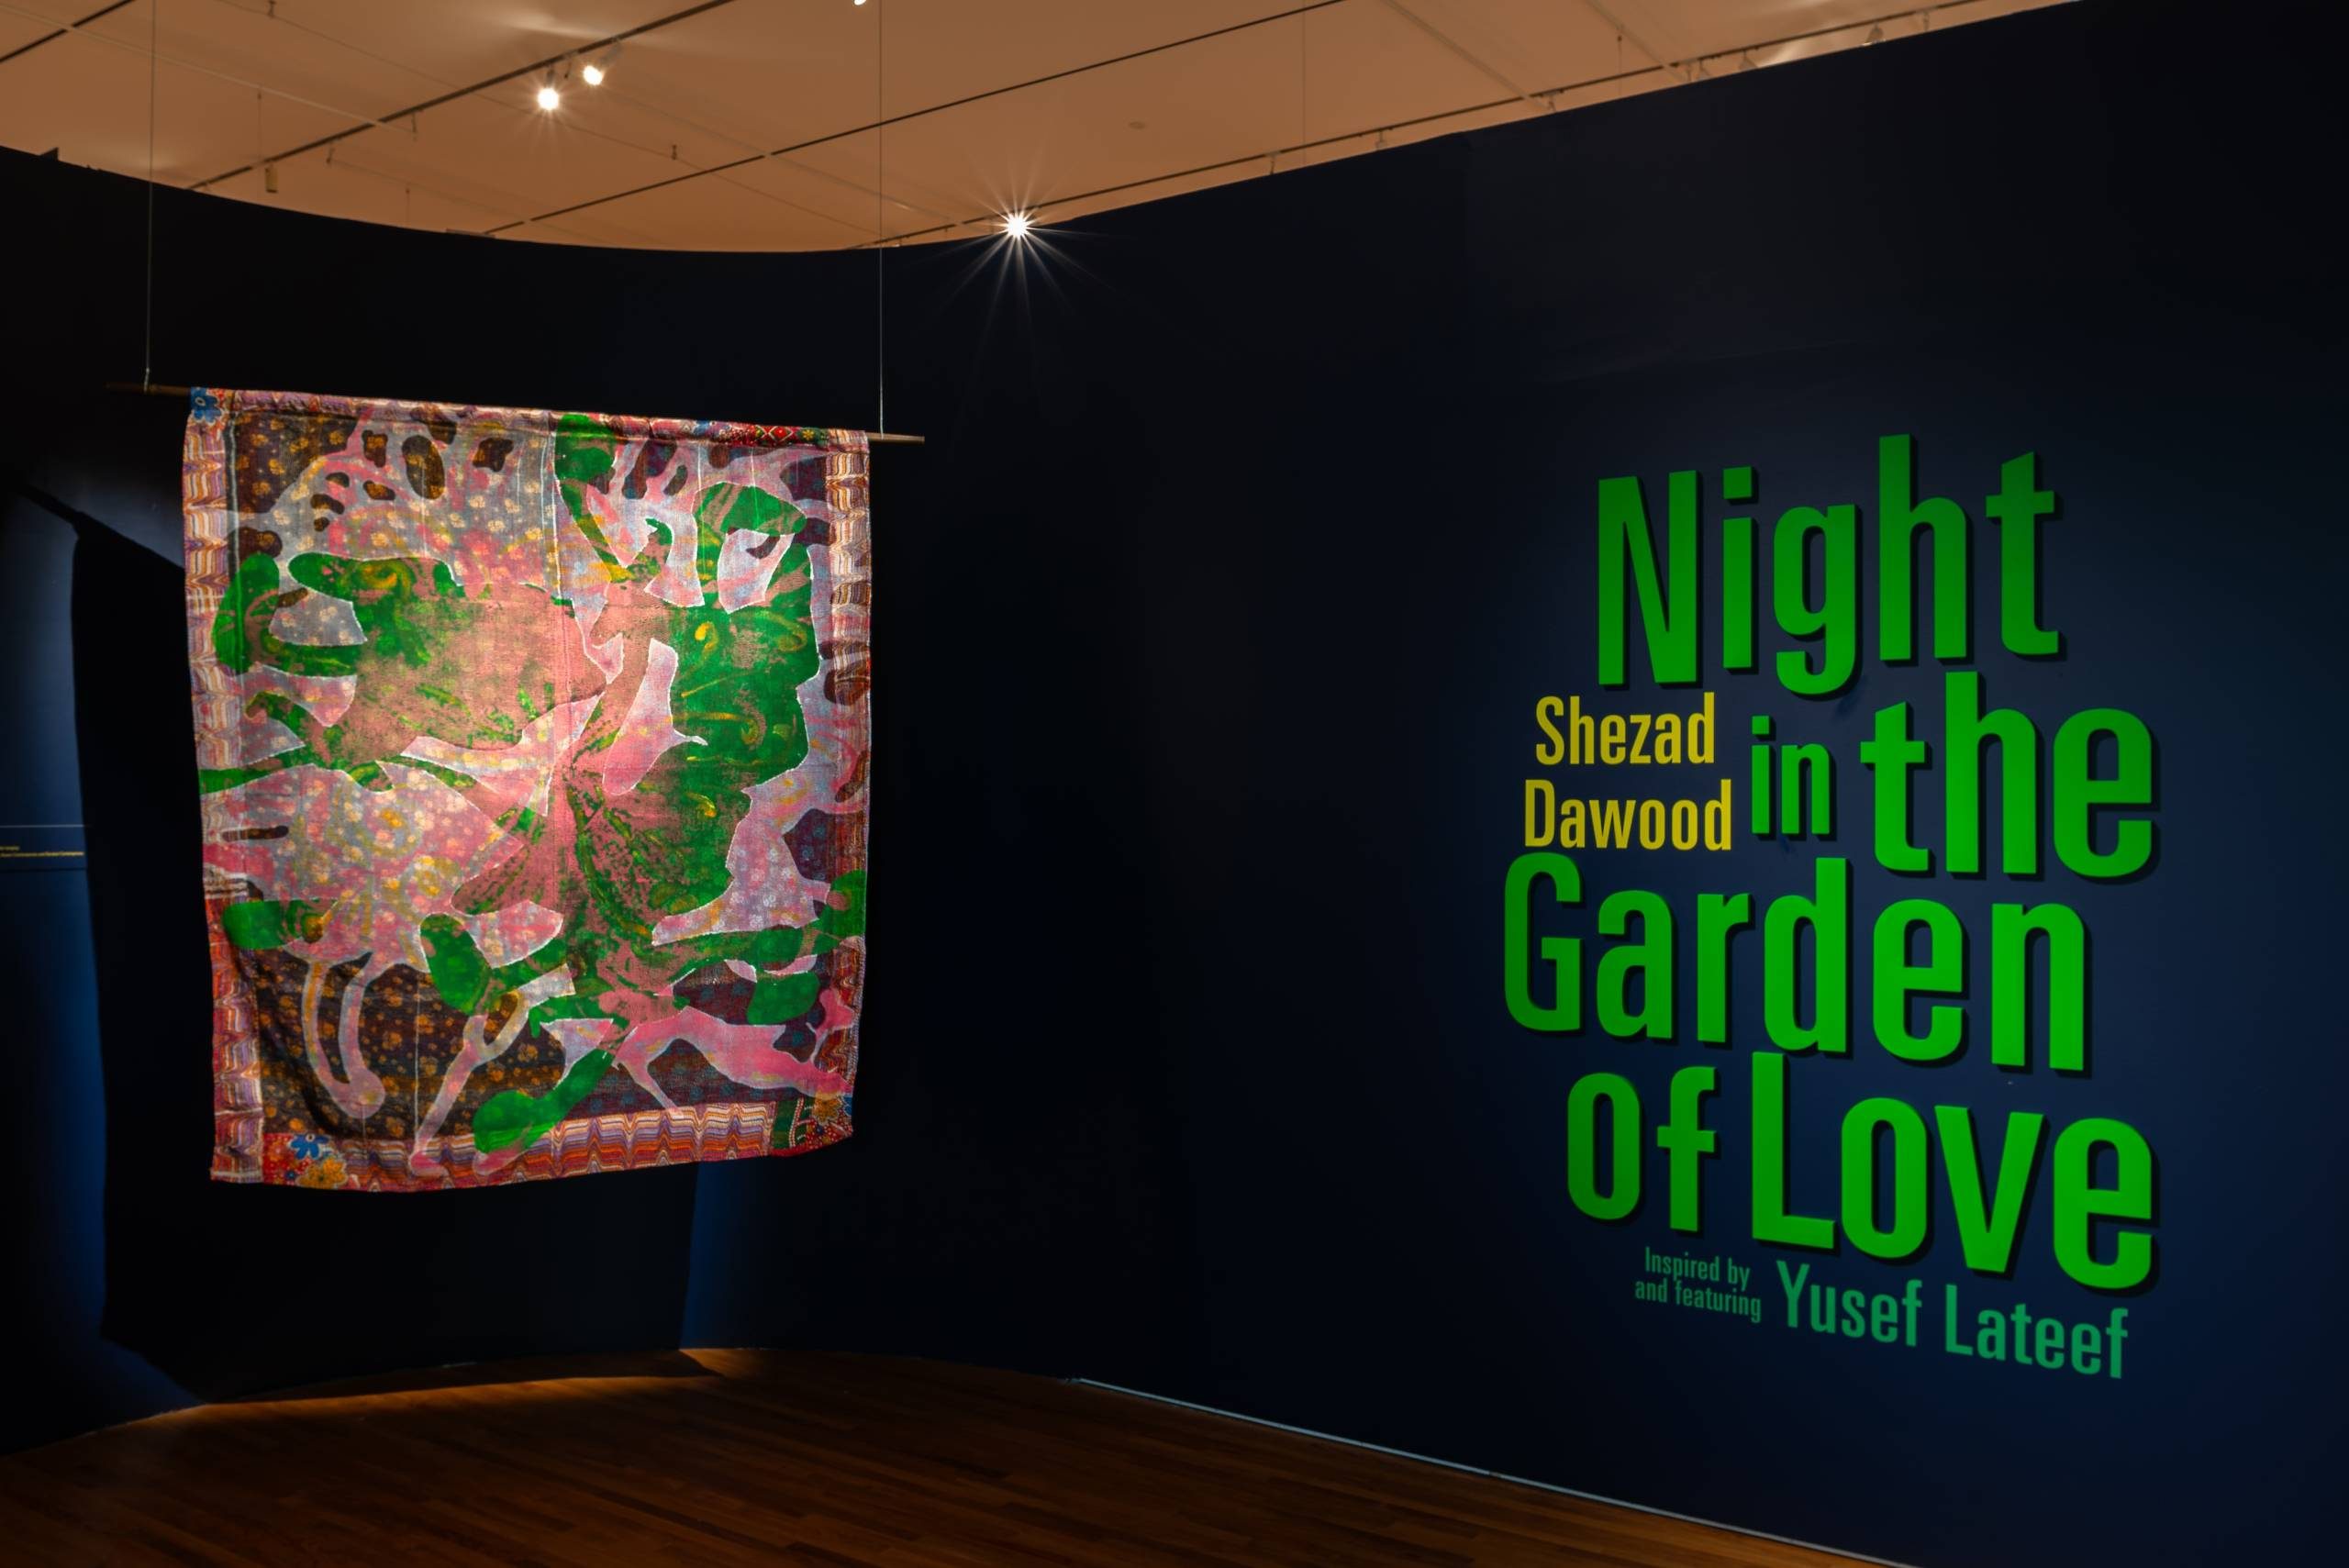 Entrance to the Night in the Garden of Love exhibition displaying a textile to the left and the title to the right